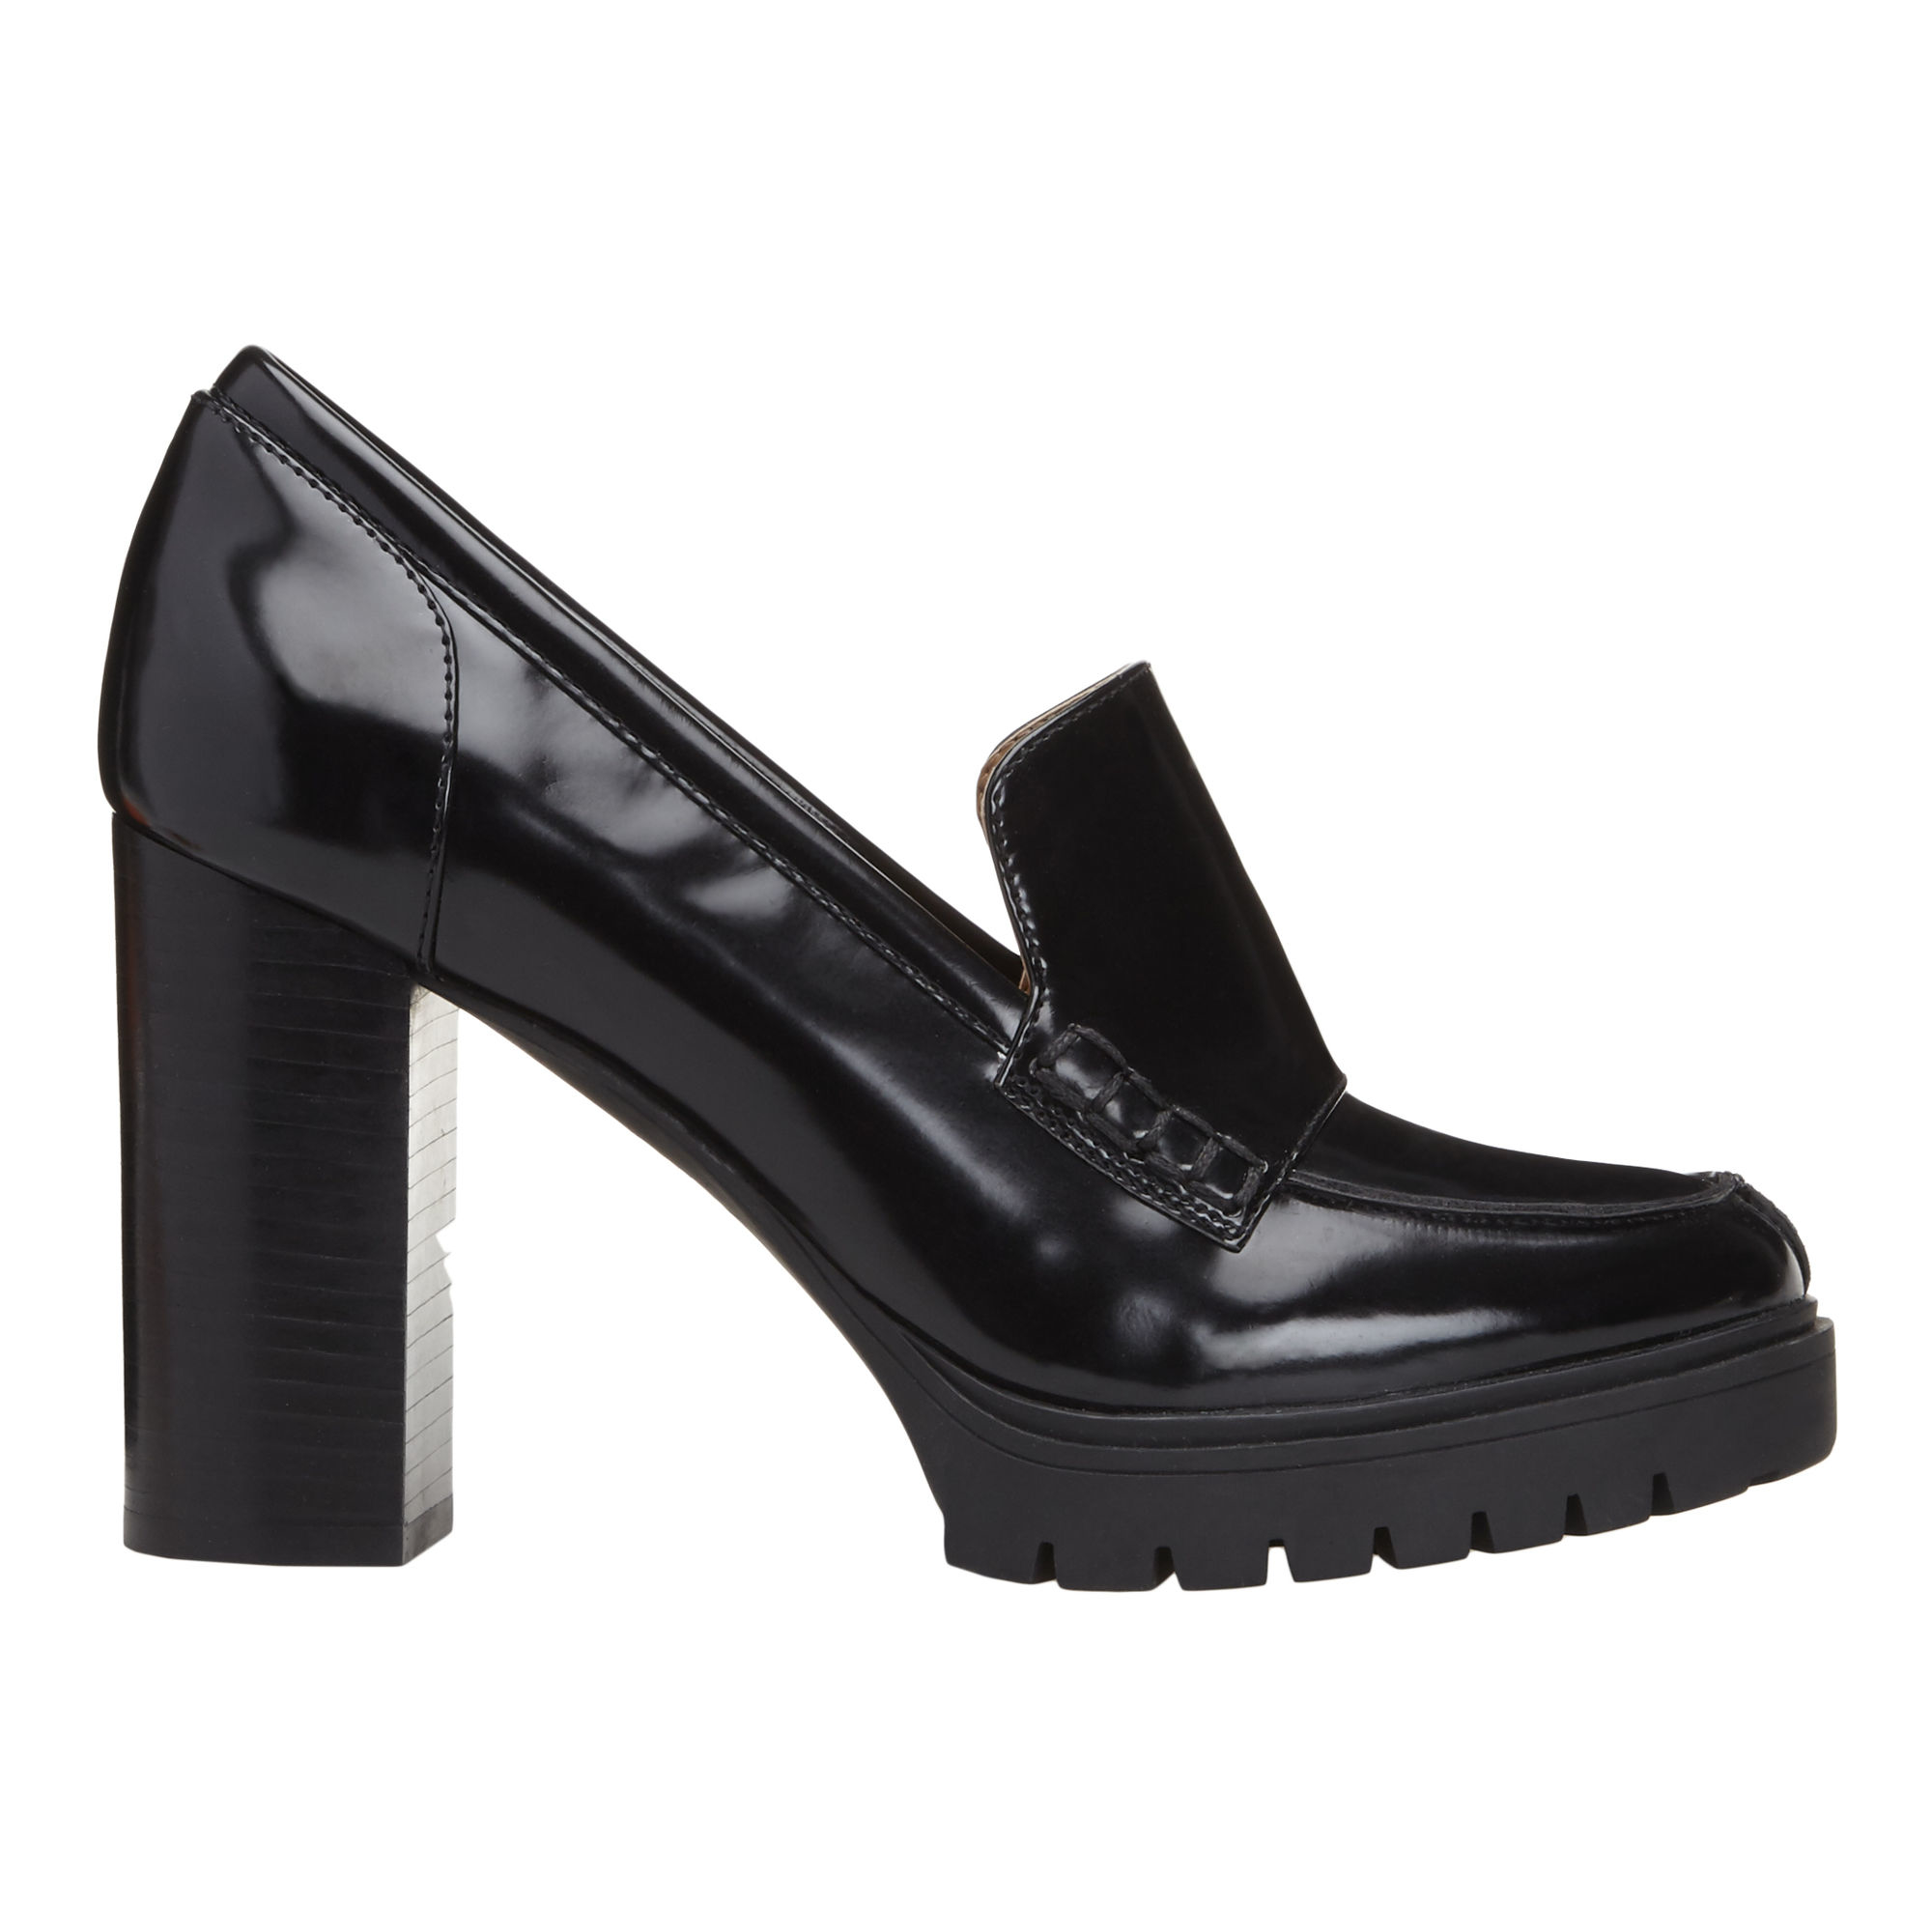 Lyst - Nine West Mad4you Menswear-inspired Pumps in Black